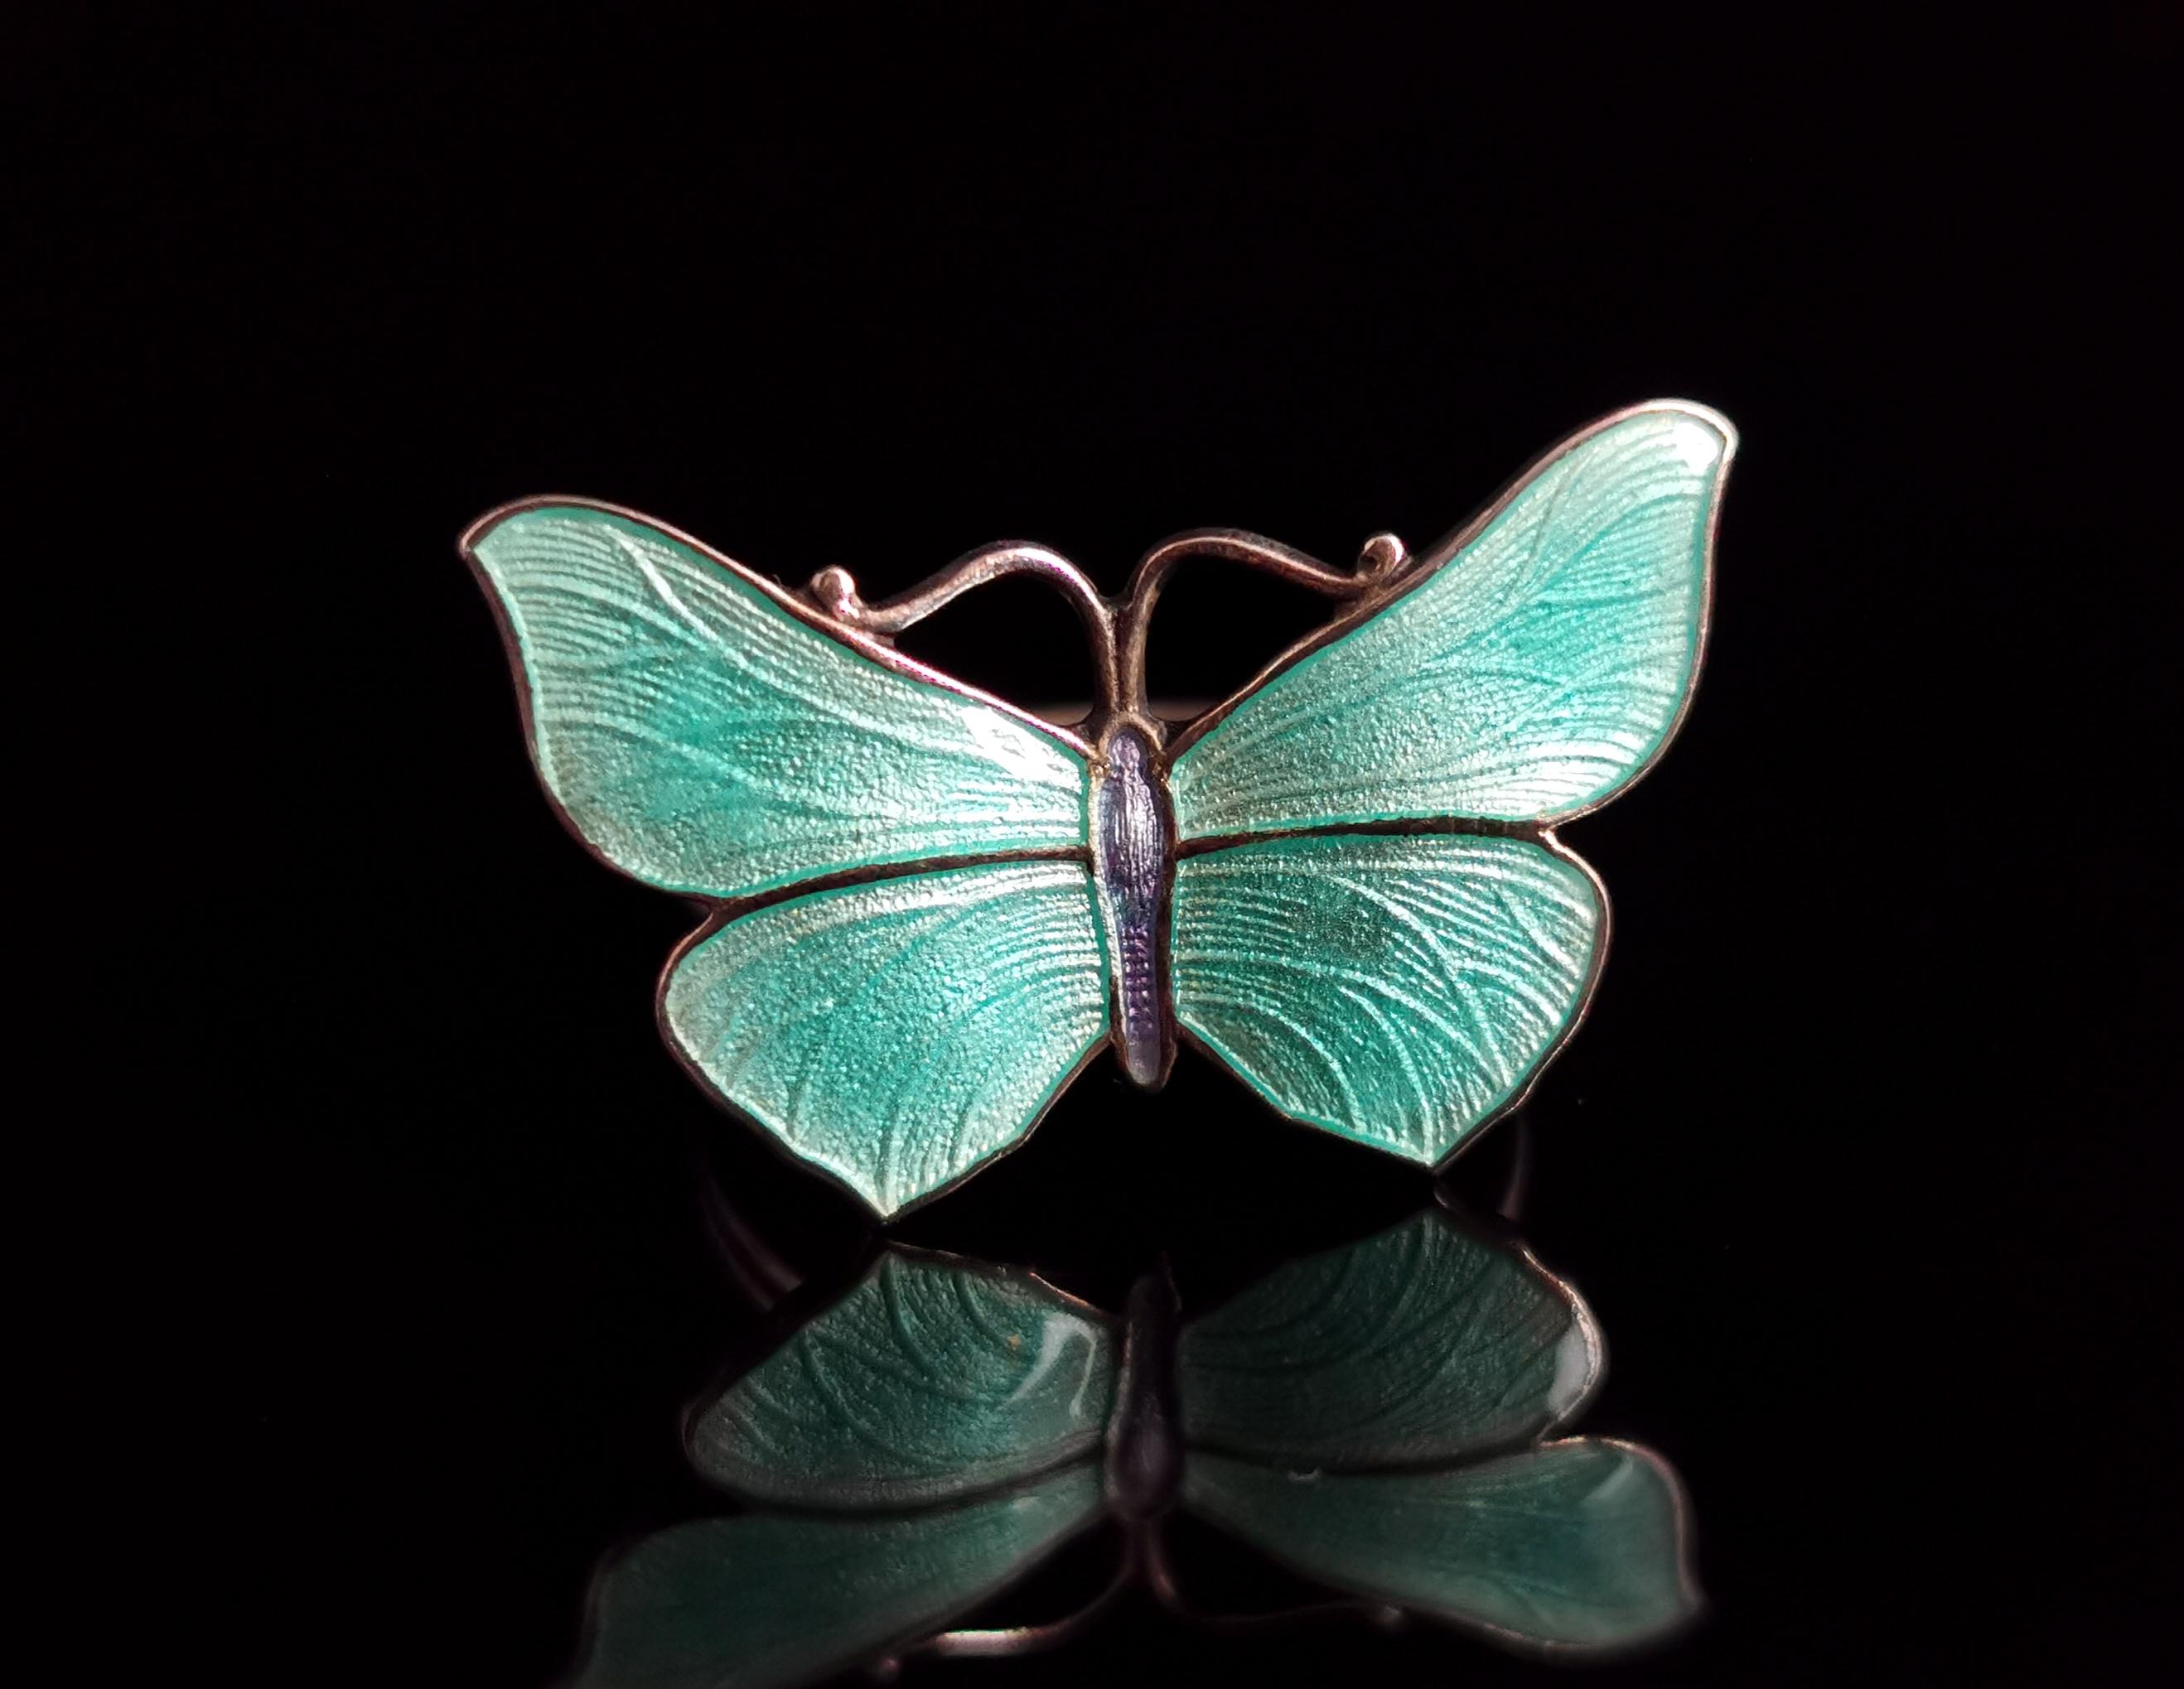 A very beautiful antique Art Deco era sterling silver and guilloche enamel butterfly ring.

So much detailing on this pretty piece, the face is designed as a butterfly with open wings with a beautiful blue guilloche enamel finish which exhibits